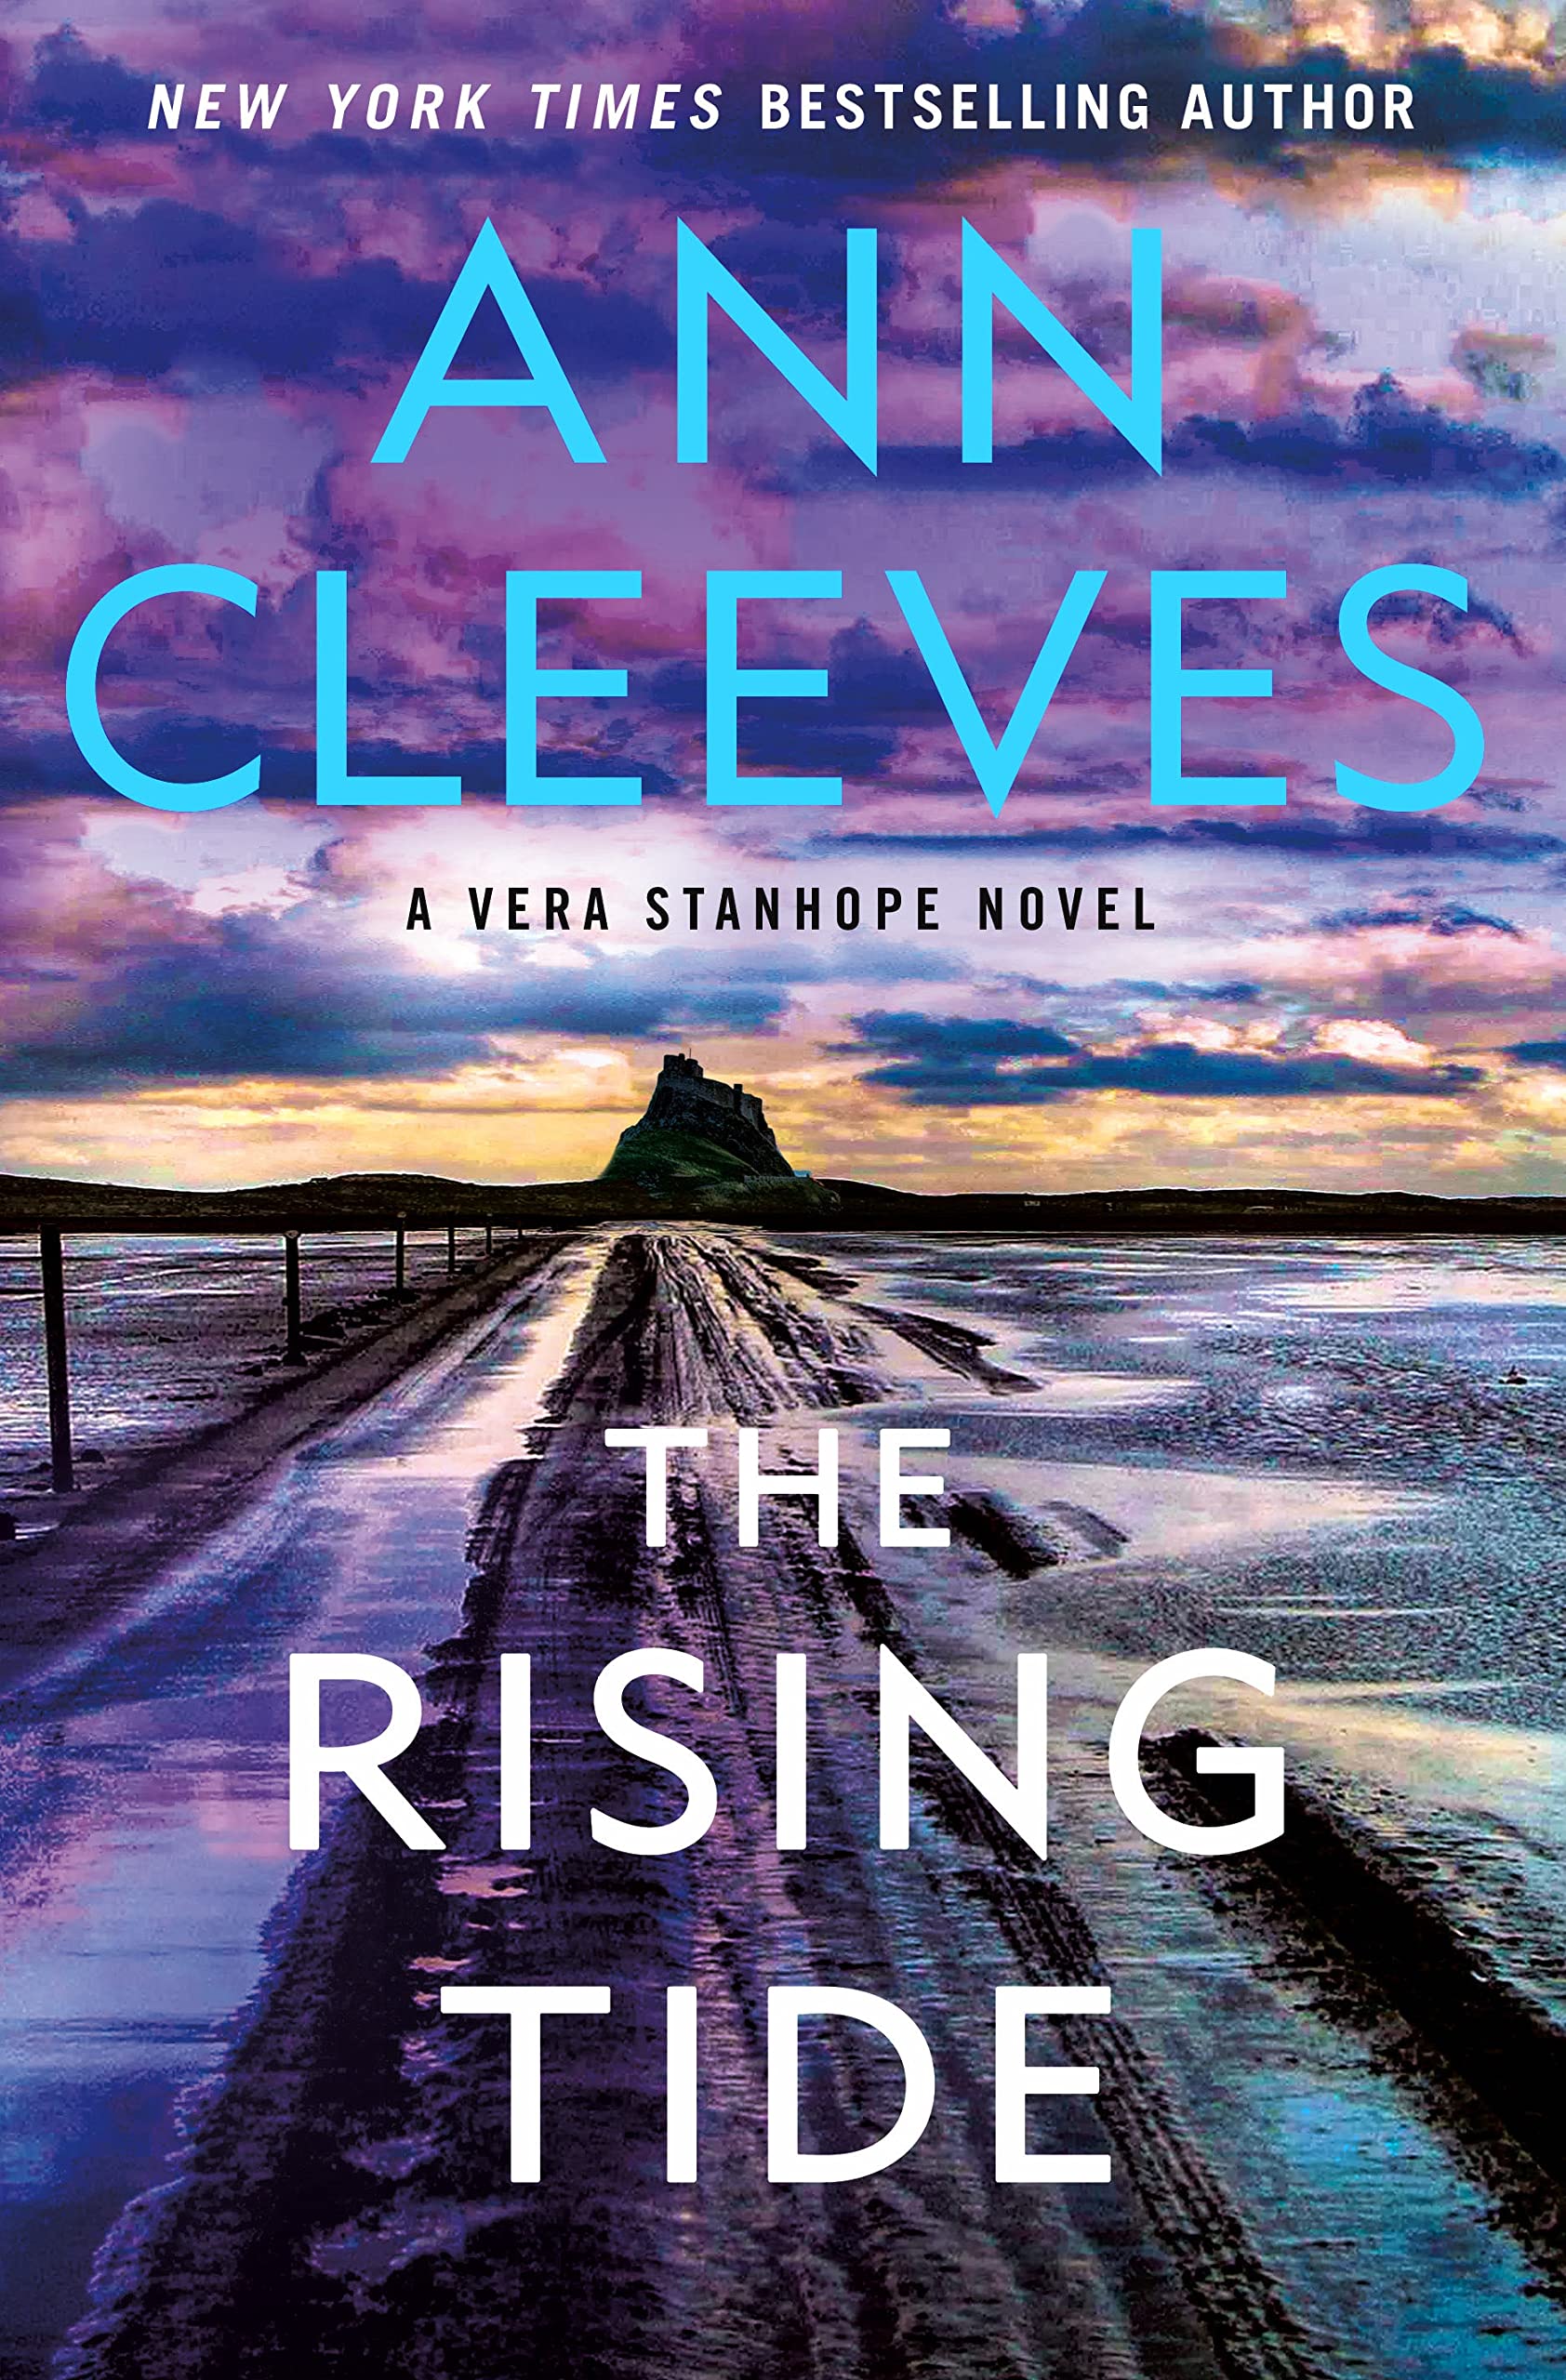 Image for "The Rising Tide: A Vera Stanhope Novel"